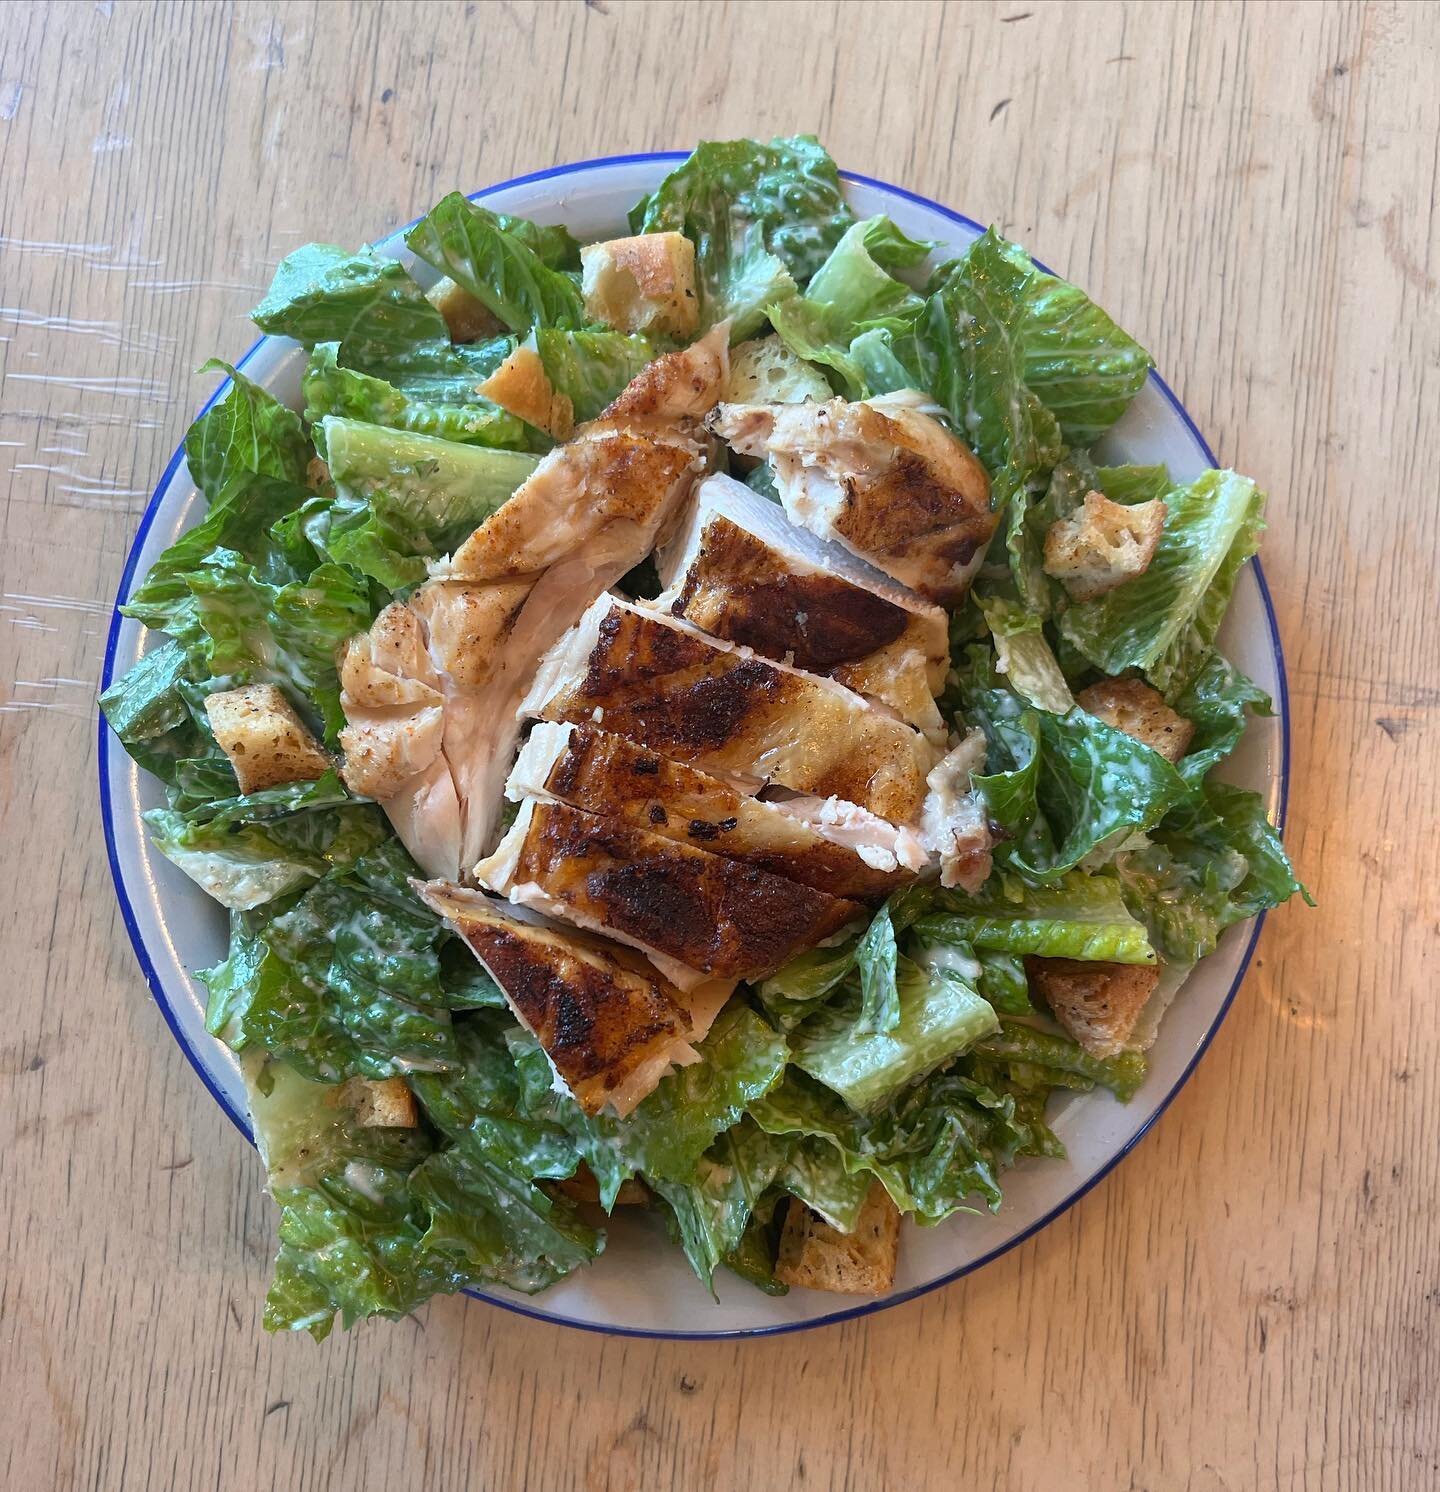 You just can&rsquo;t go wrong with a Caesar salad! With our house dressing and a Hot BBQ add-on, it&rsquo;s one of our most popular lunch orders for a reason! 
If you&rsquo;re not feeling like a hot BBQ then try it with sliced chkn breast, pulled dar